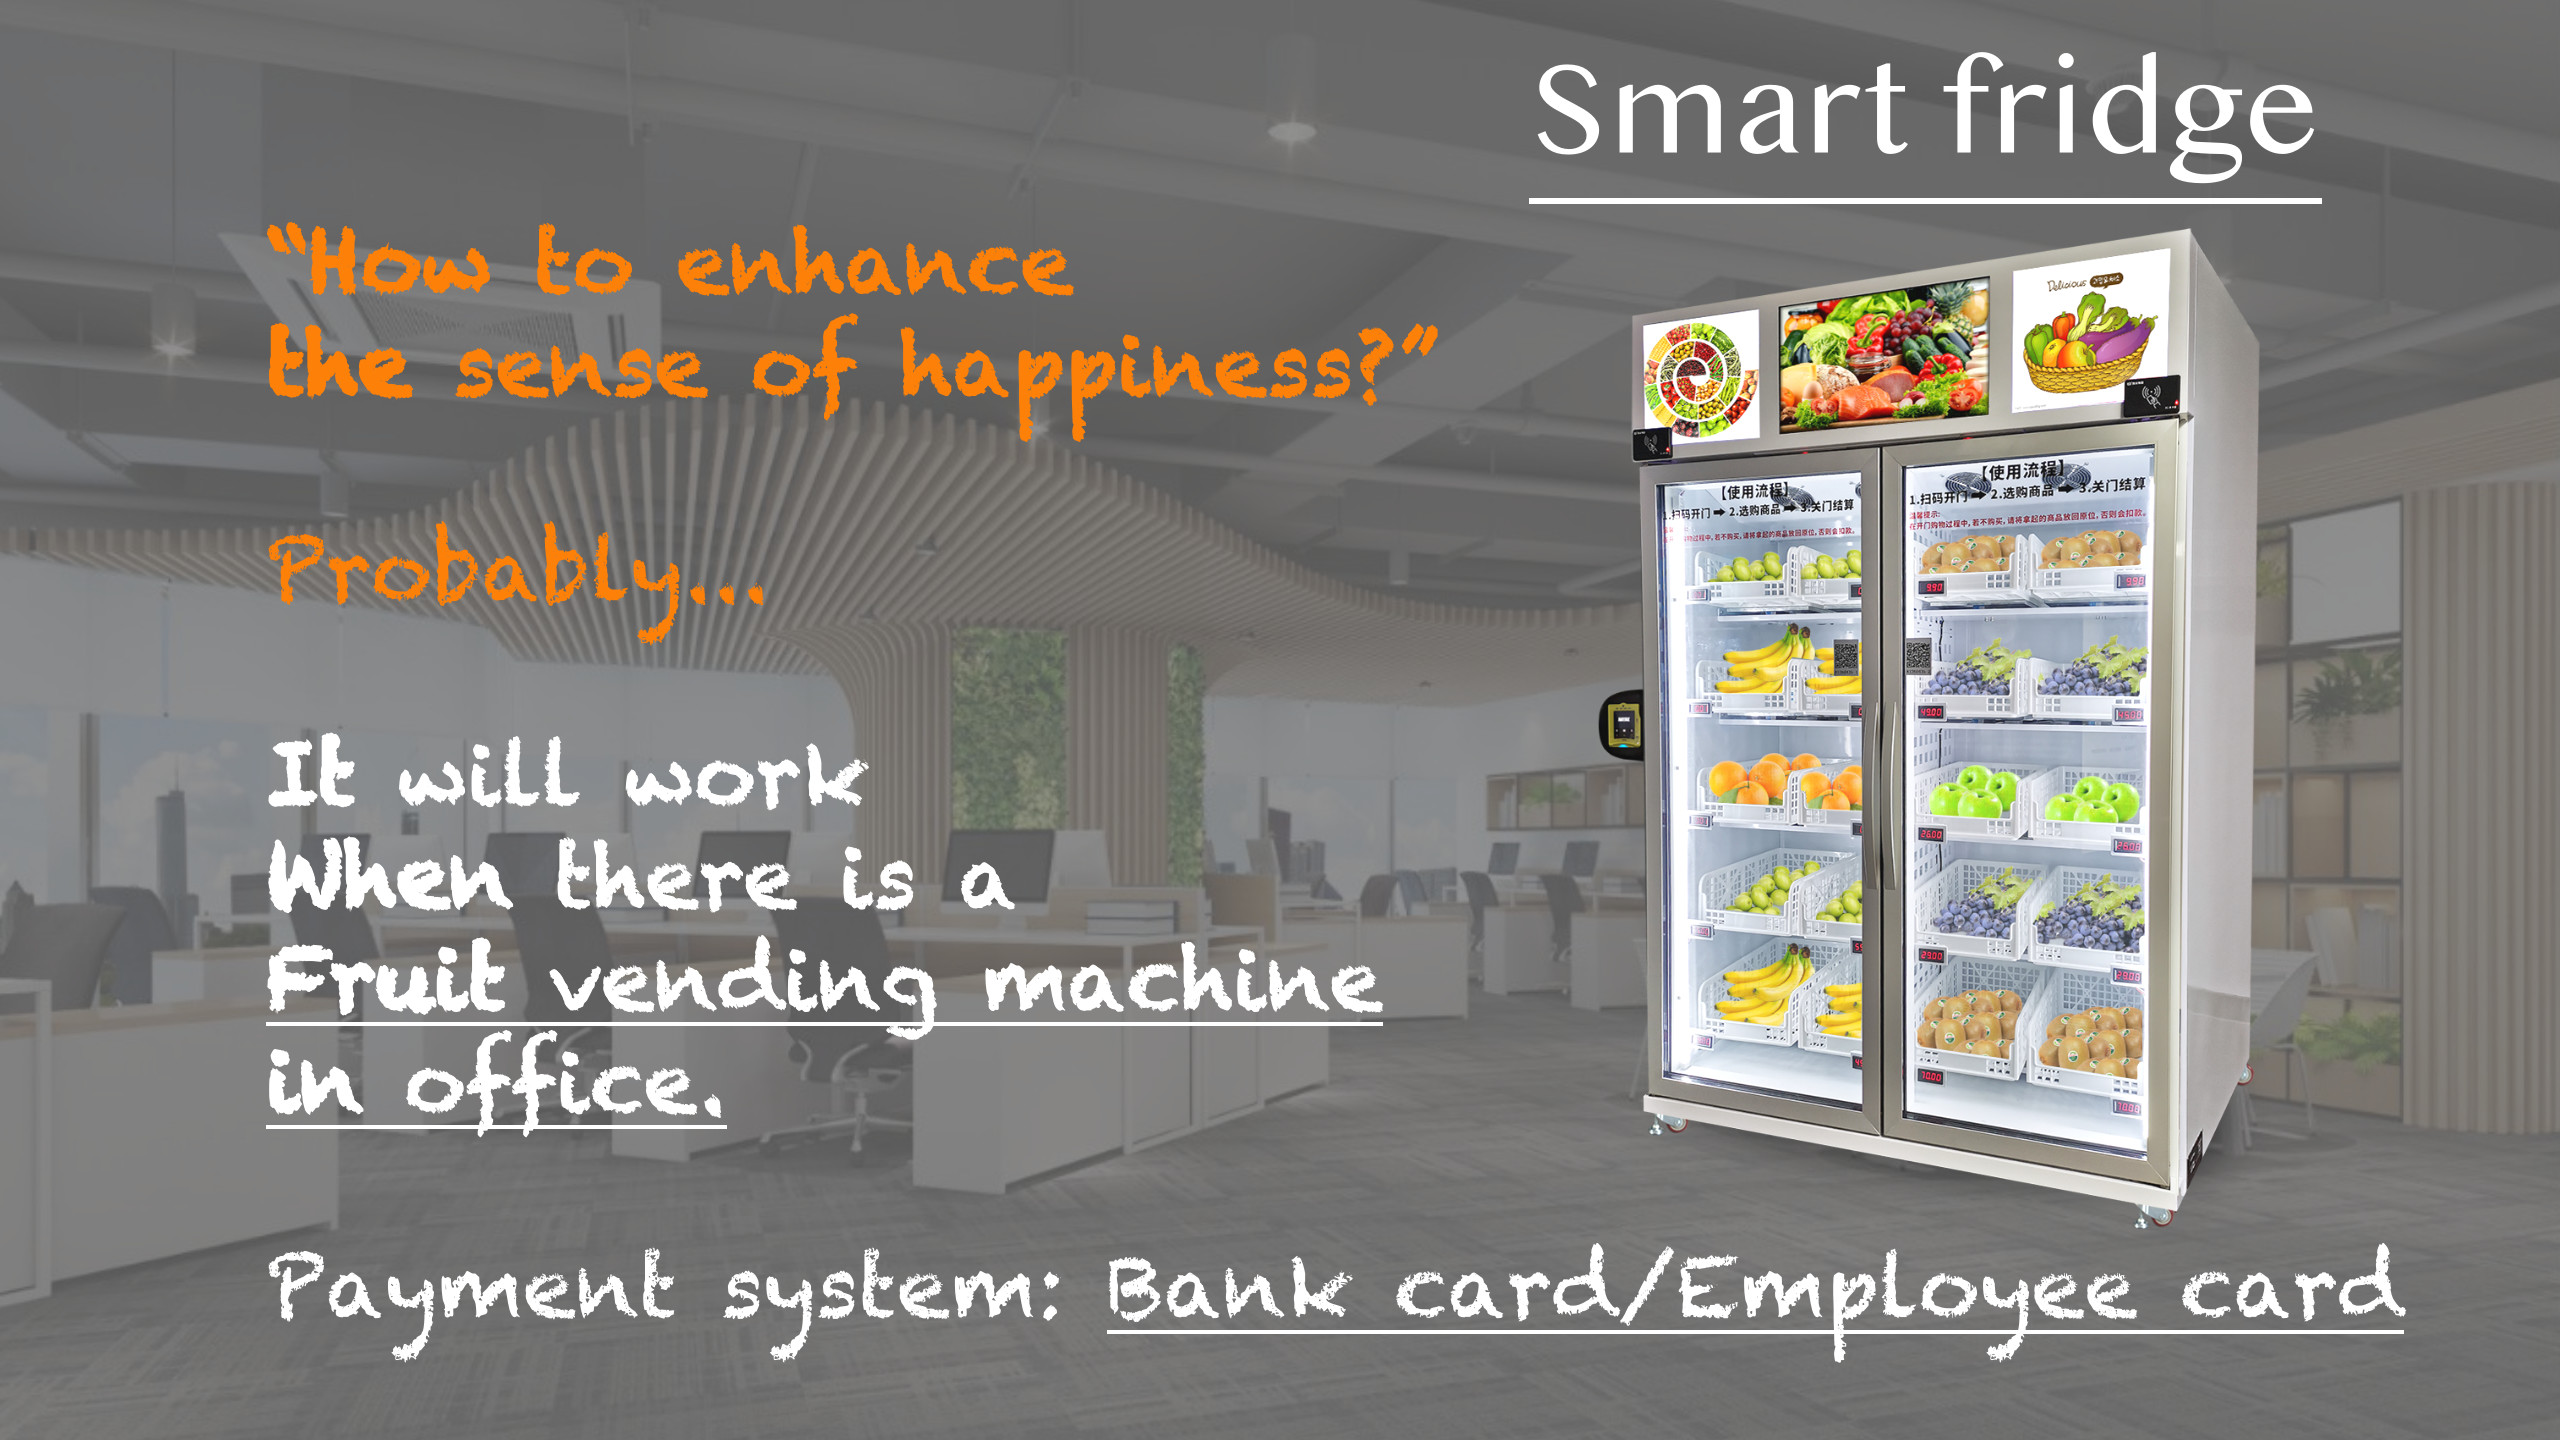 Quality E Wallet Smart Fridge Vending Machine For Vegetables with Telemetry System for Online Real-time Management, Micron for sale